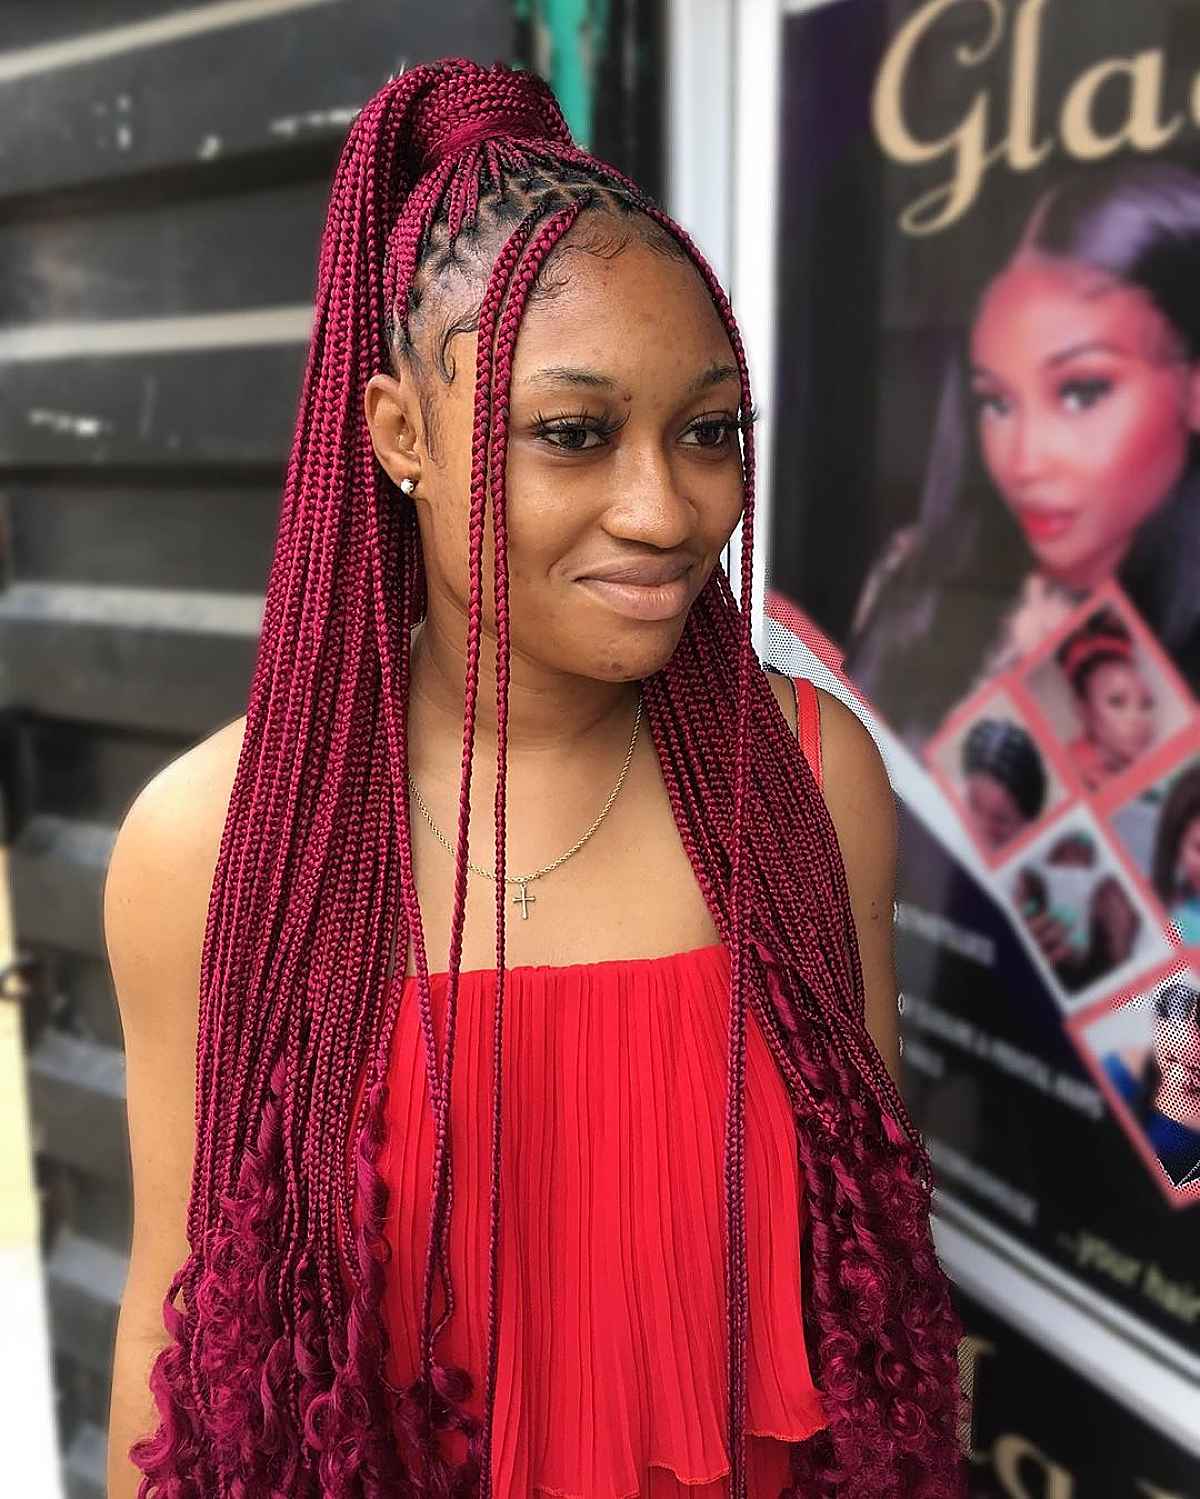 Knotless braids with burgundy color